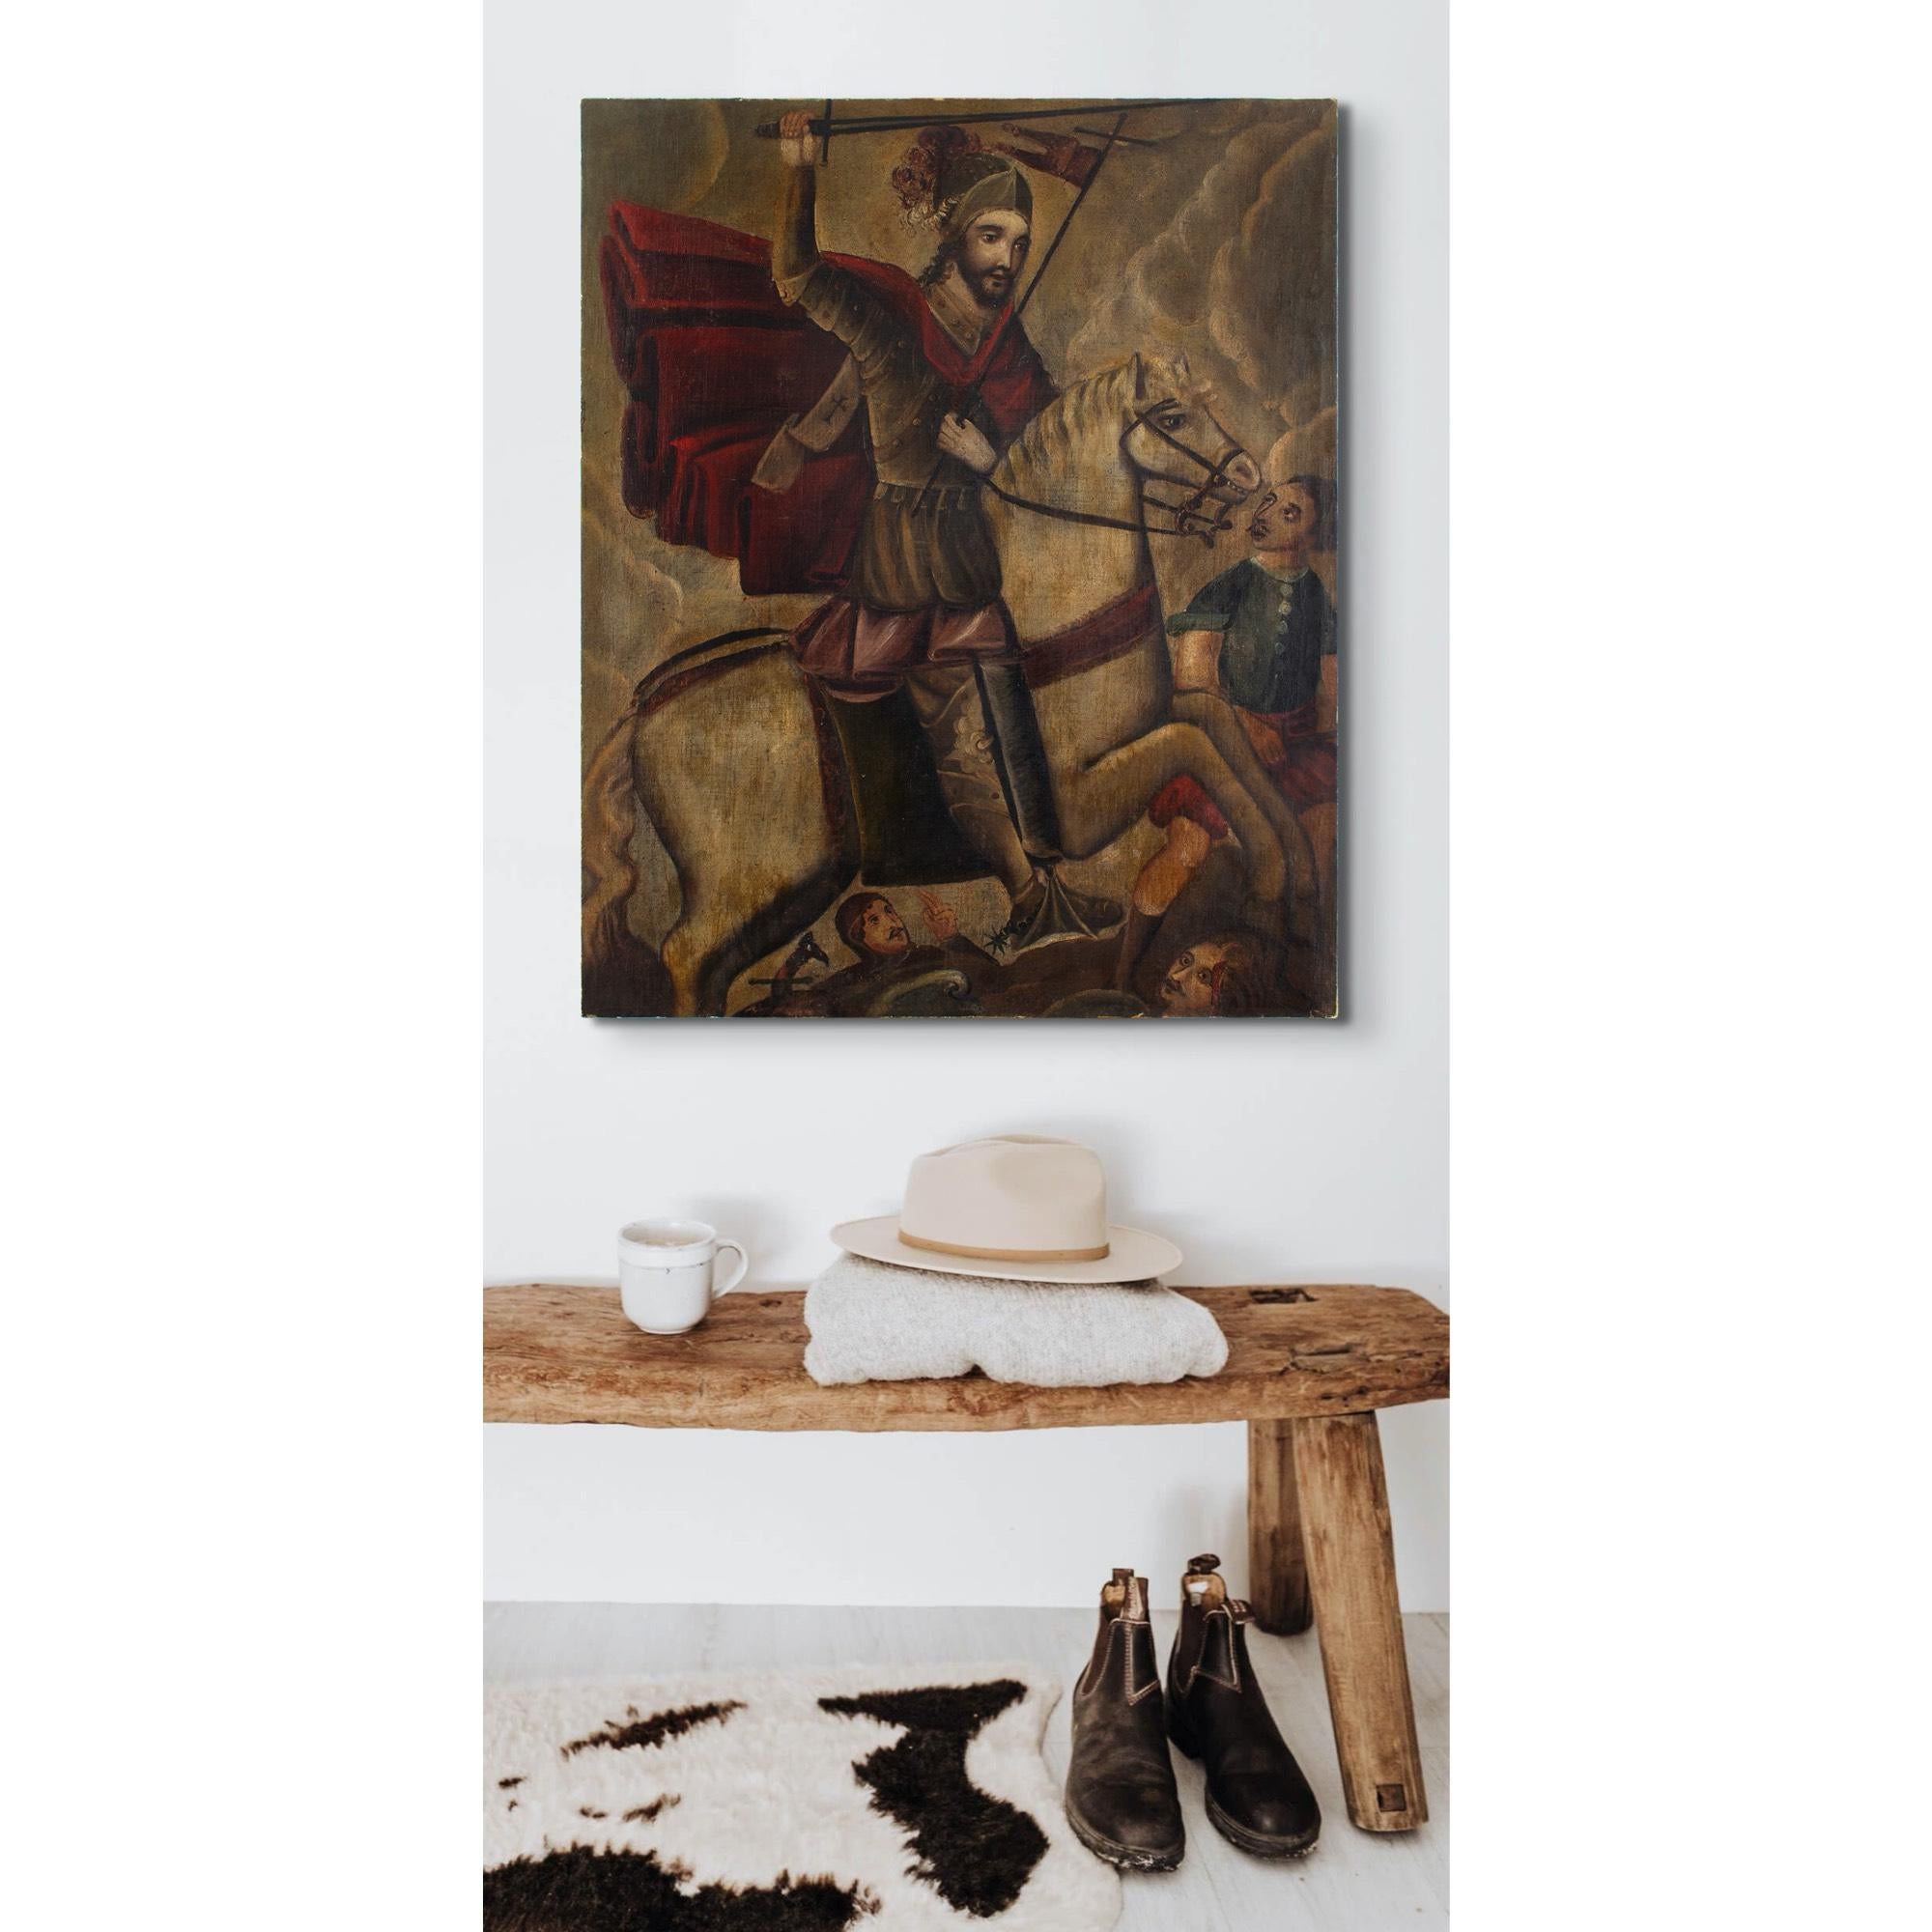 This 18th-century Peruvian oil painting depicts James Matamoros, the former Patron Saint of Spain, holding a sword and cross while riding a white horse.

From 1532, Cusco, Peru, became a Spanish colony and the church sought to convert the indigenous